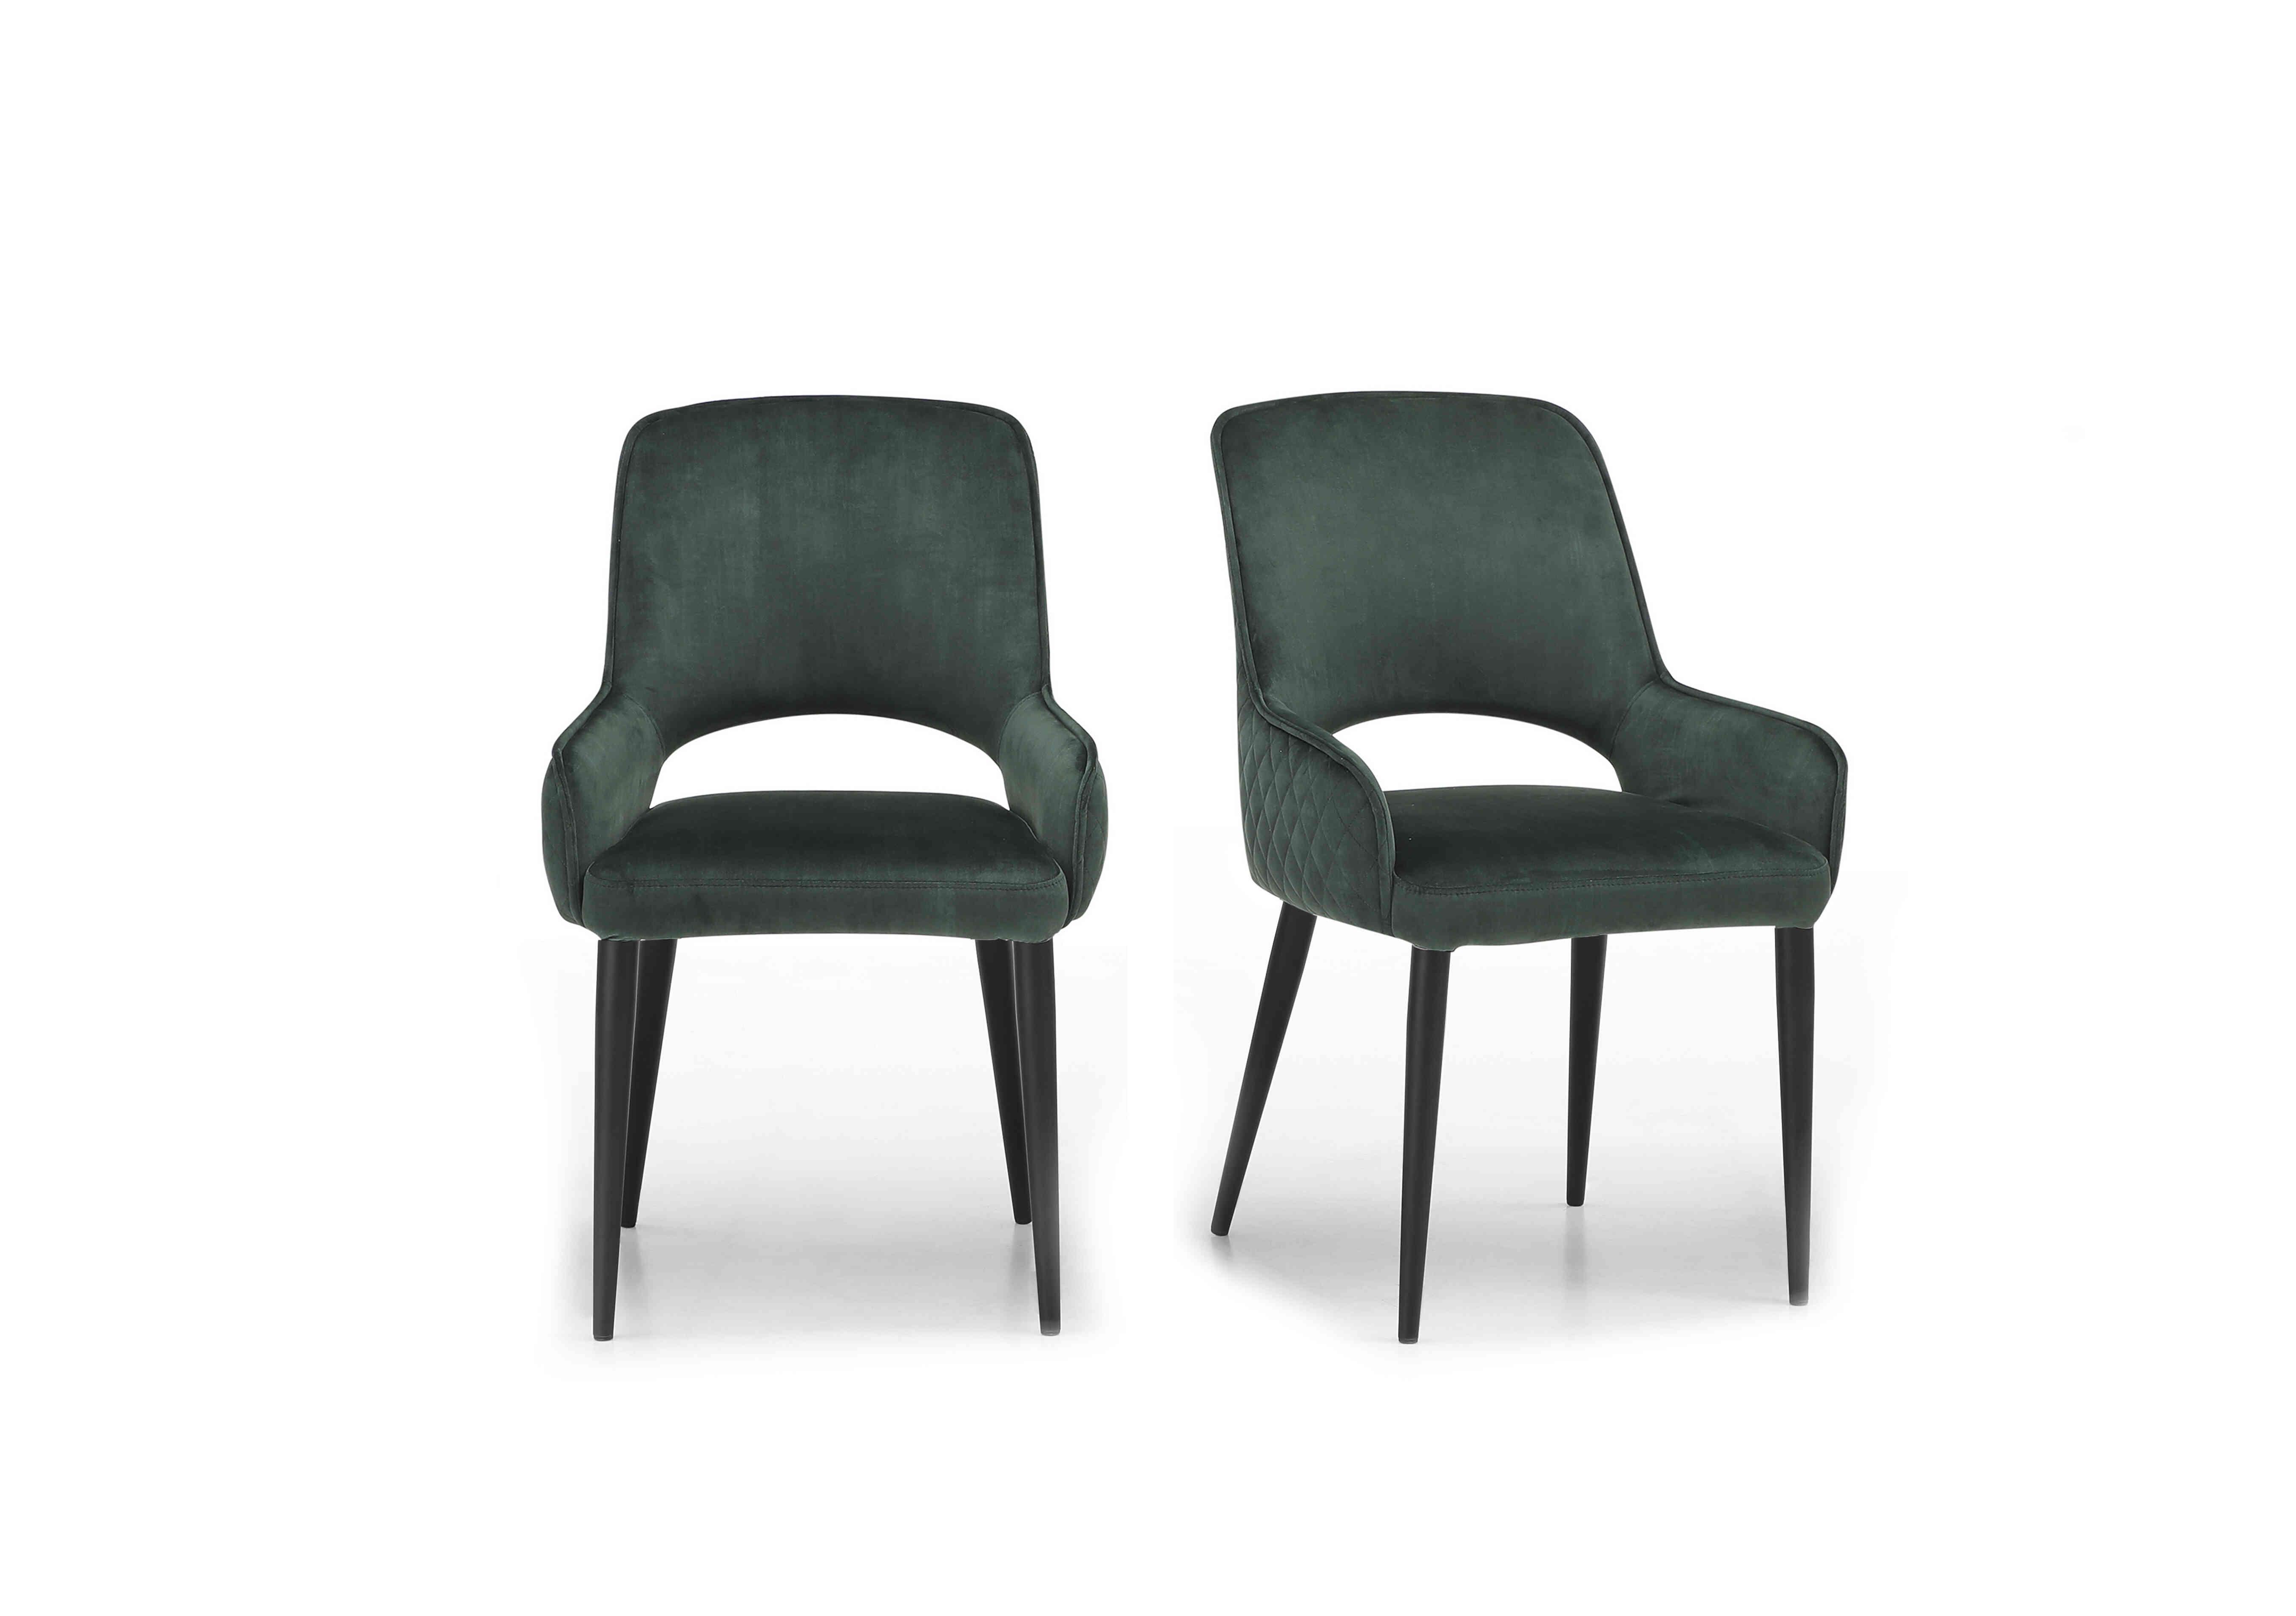 Basque Pair of Dining Chairs in Bottle Green on Furniture Village